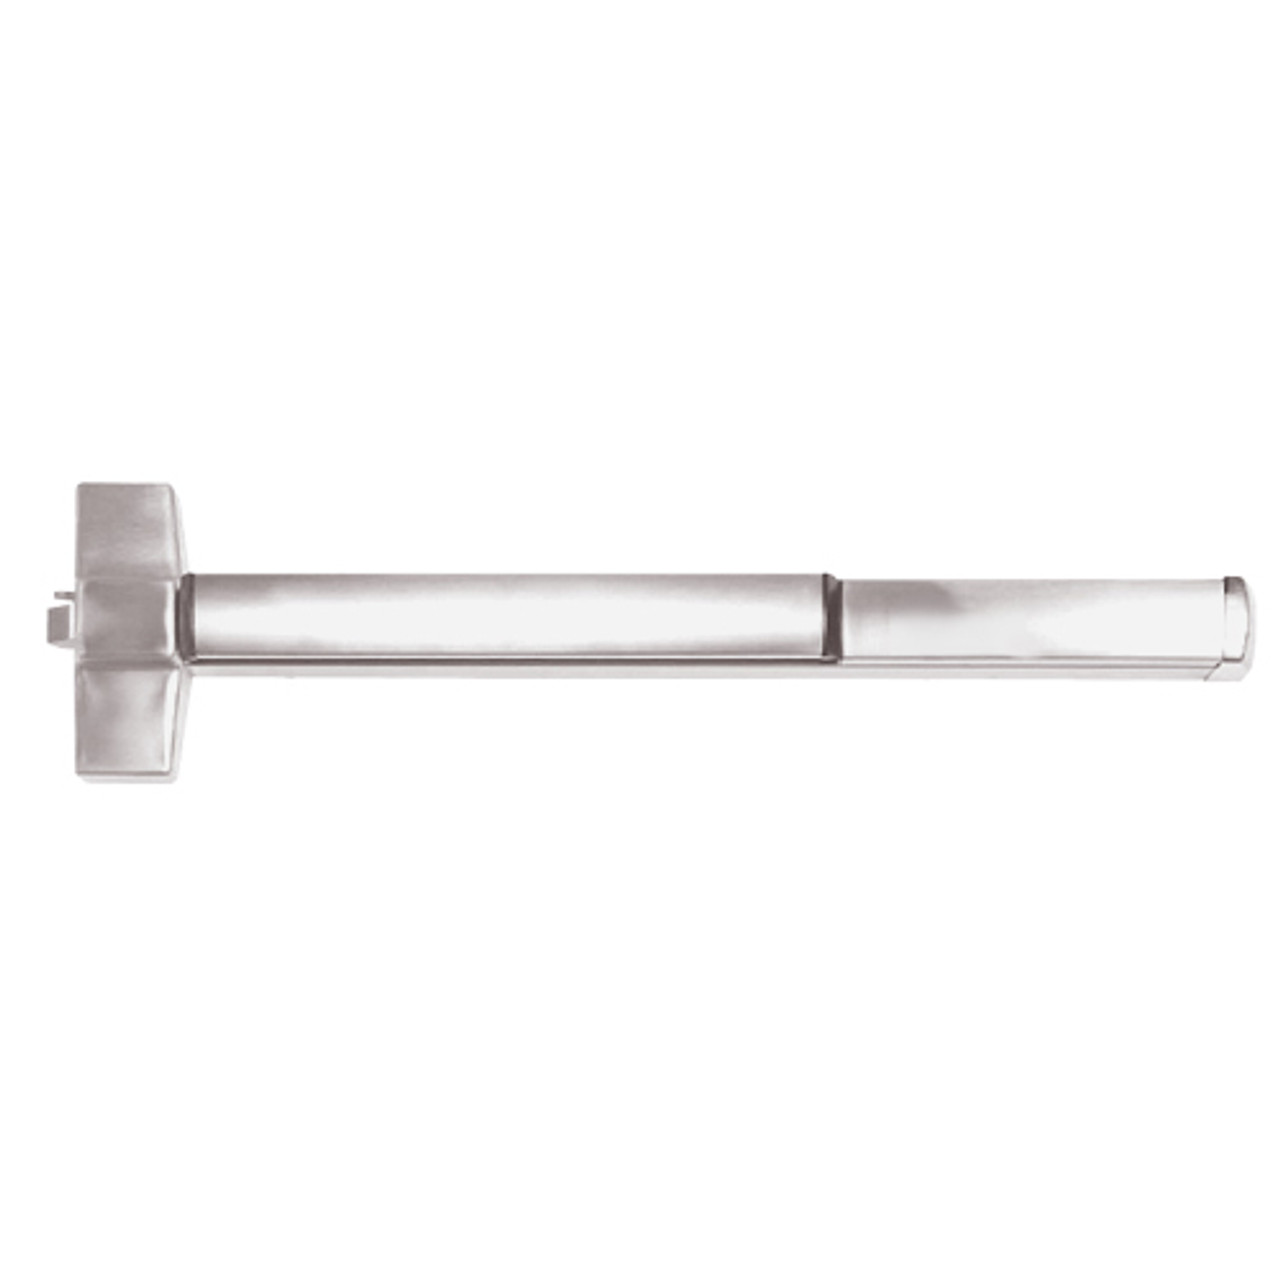 ED5200A-630 Corbin ED5200 Series Fire Rated Rim Exit Device in Satin Stainless Steel Finish